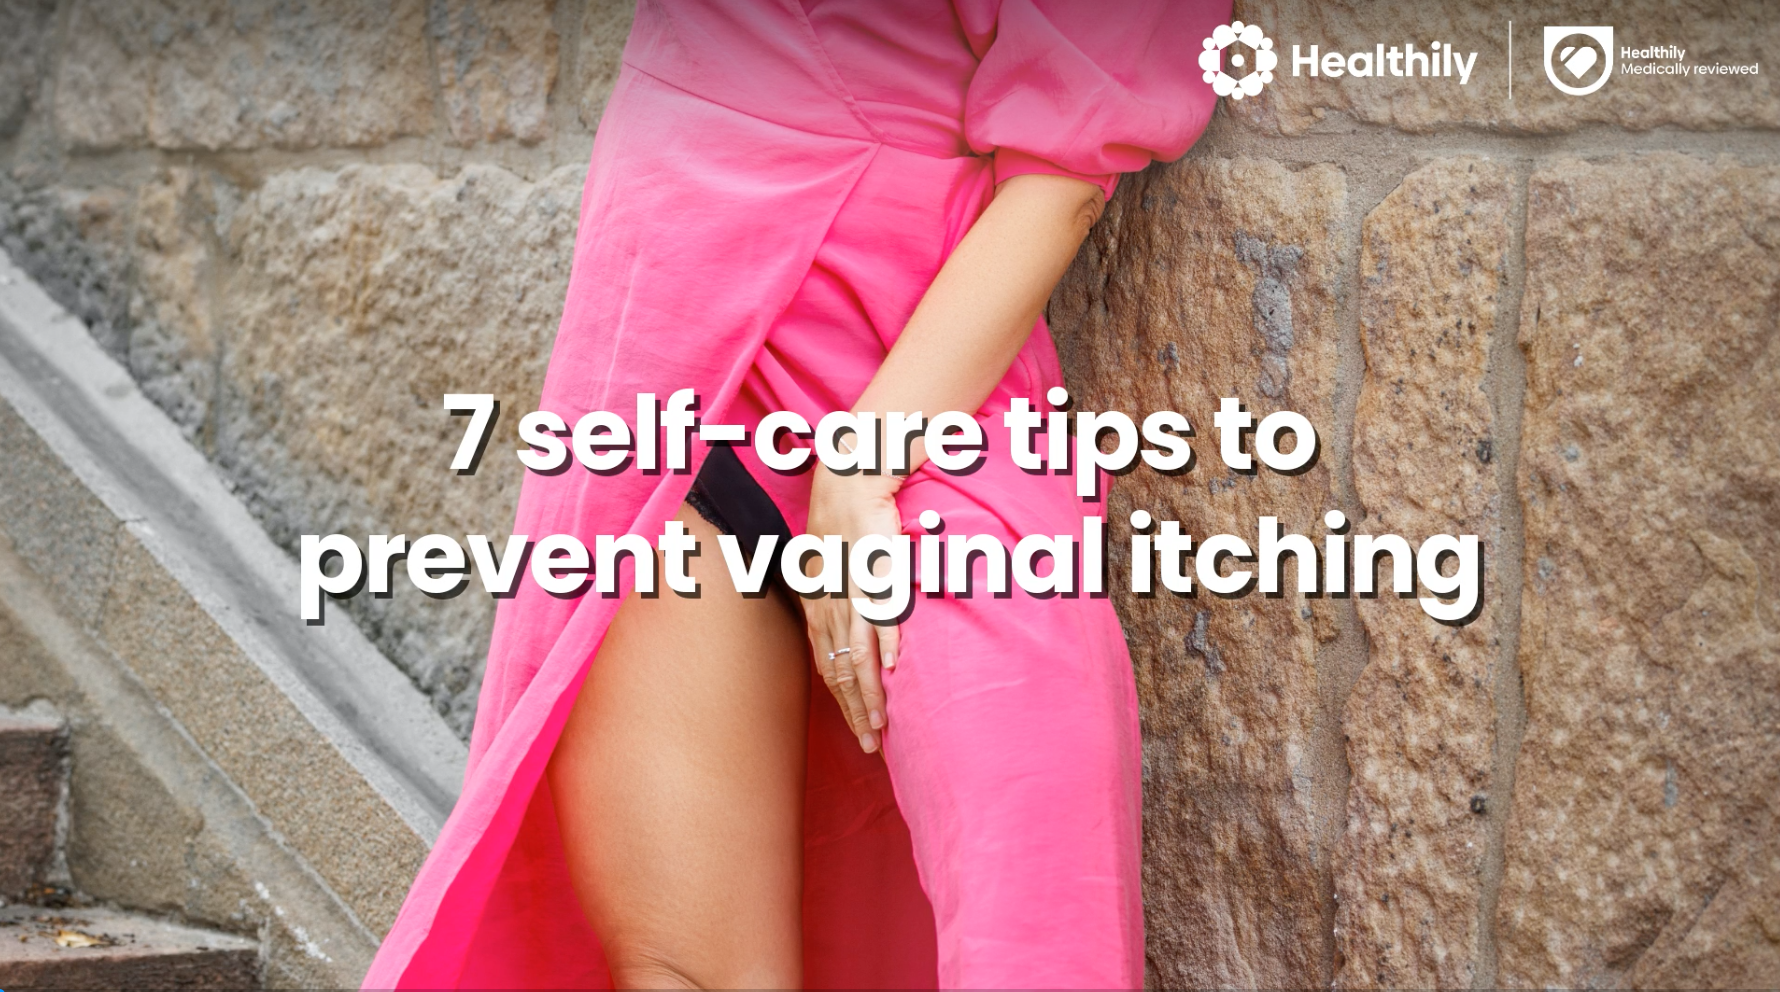 How To Care For Vaginal Discharge: An Intimate Hygiene Guide